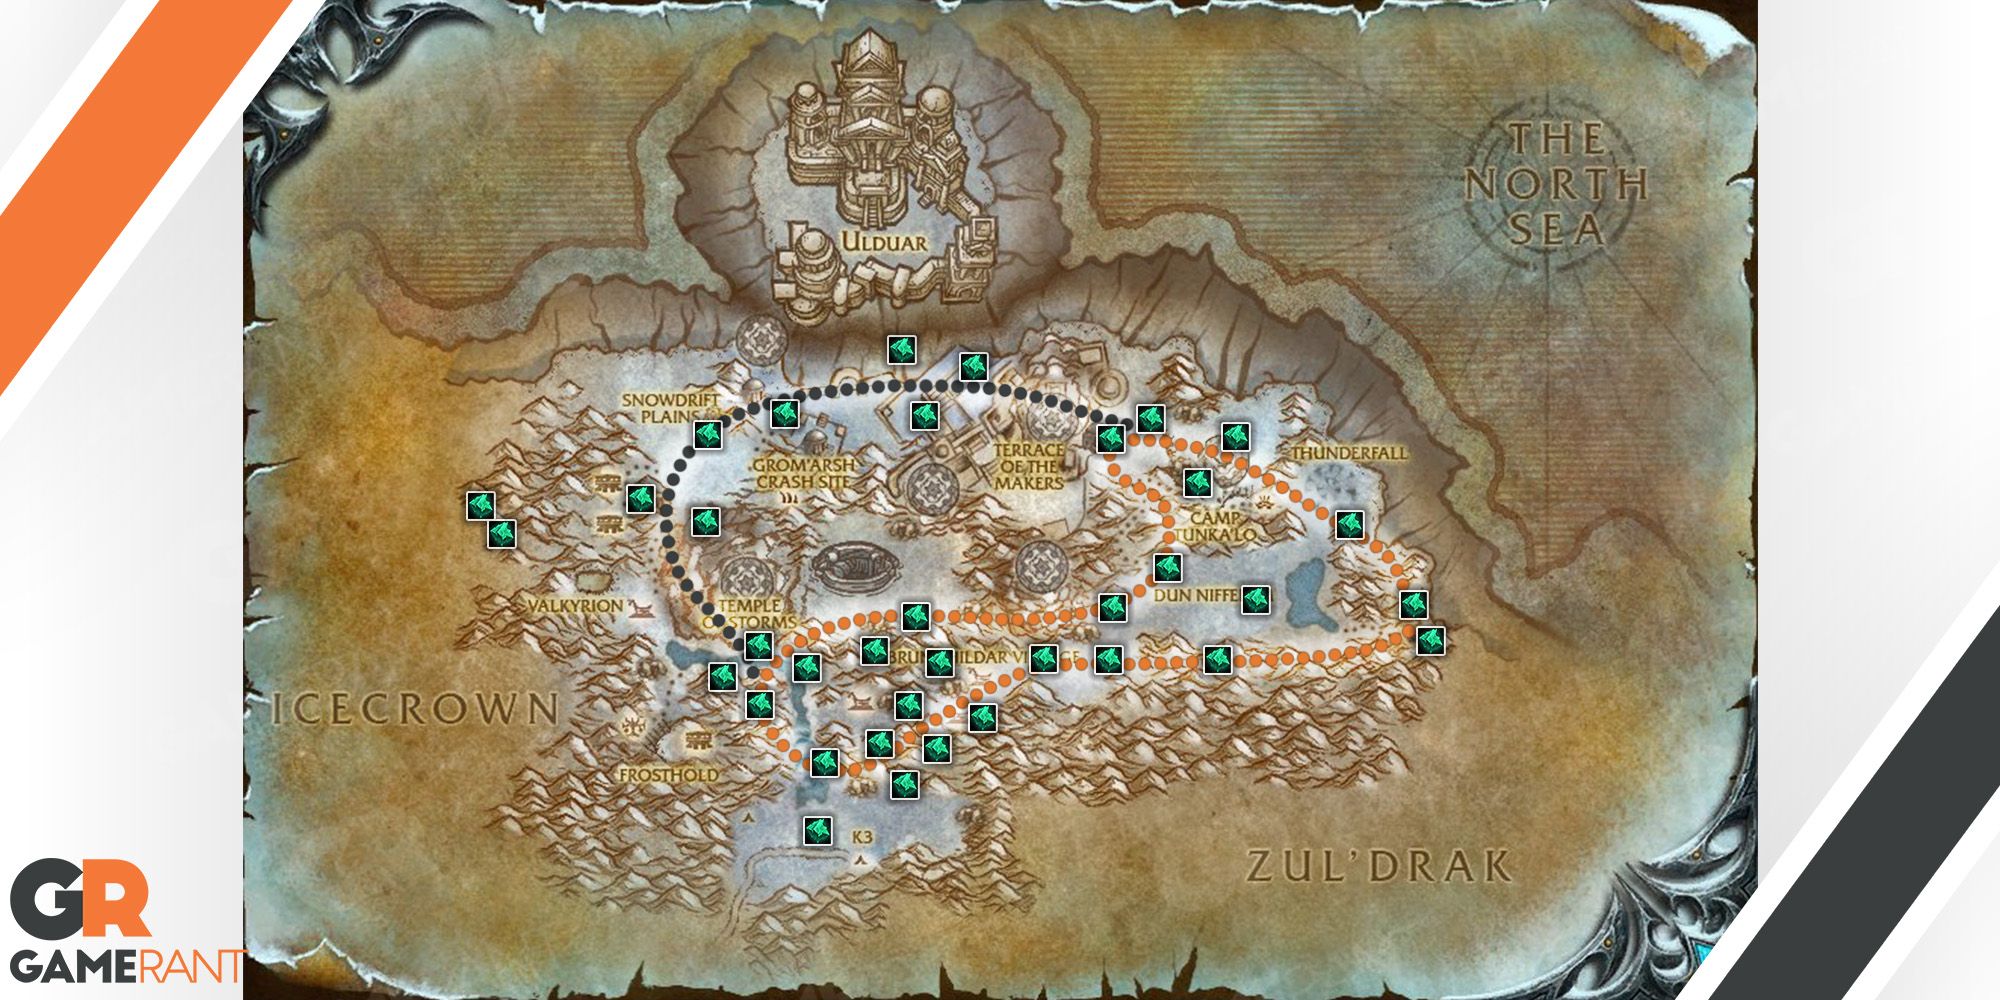 in game map of stormpeaks highlighting the best Farming Routes for saronite ore deposits